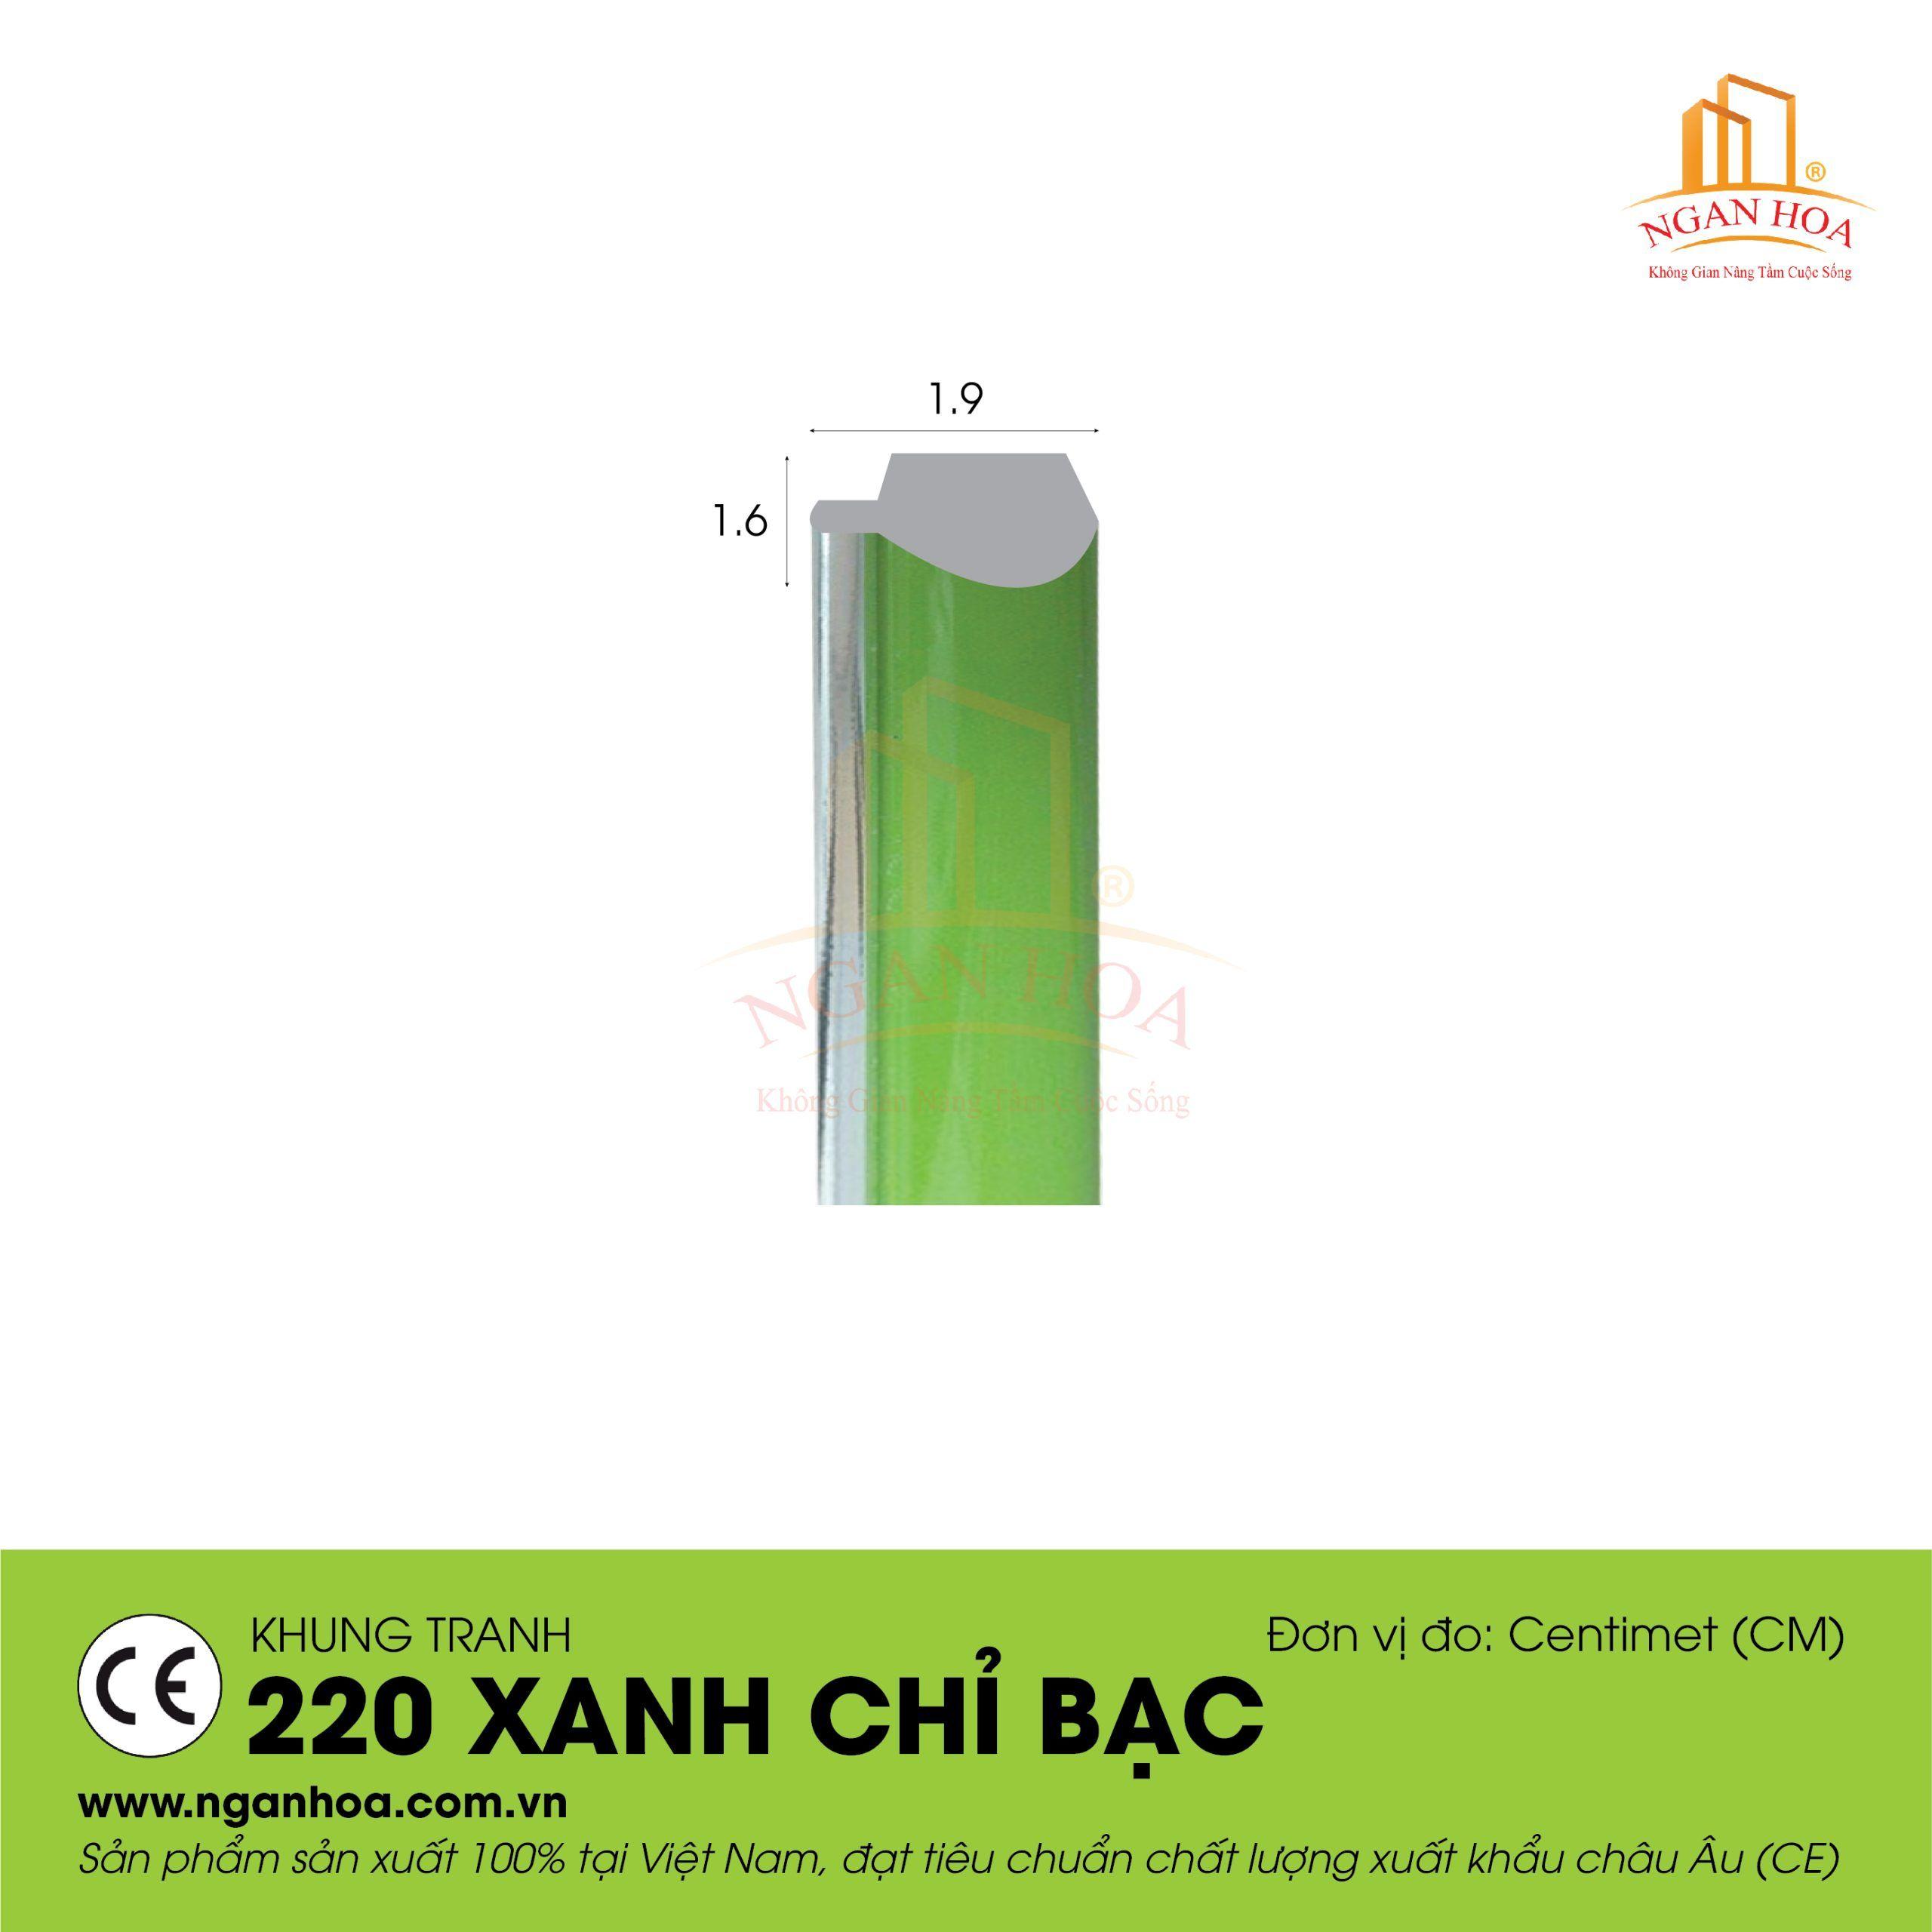 KT 220 Xanh chi bac scaled